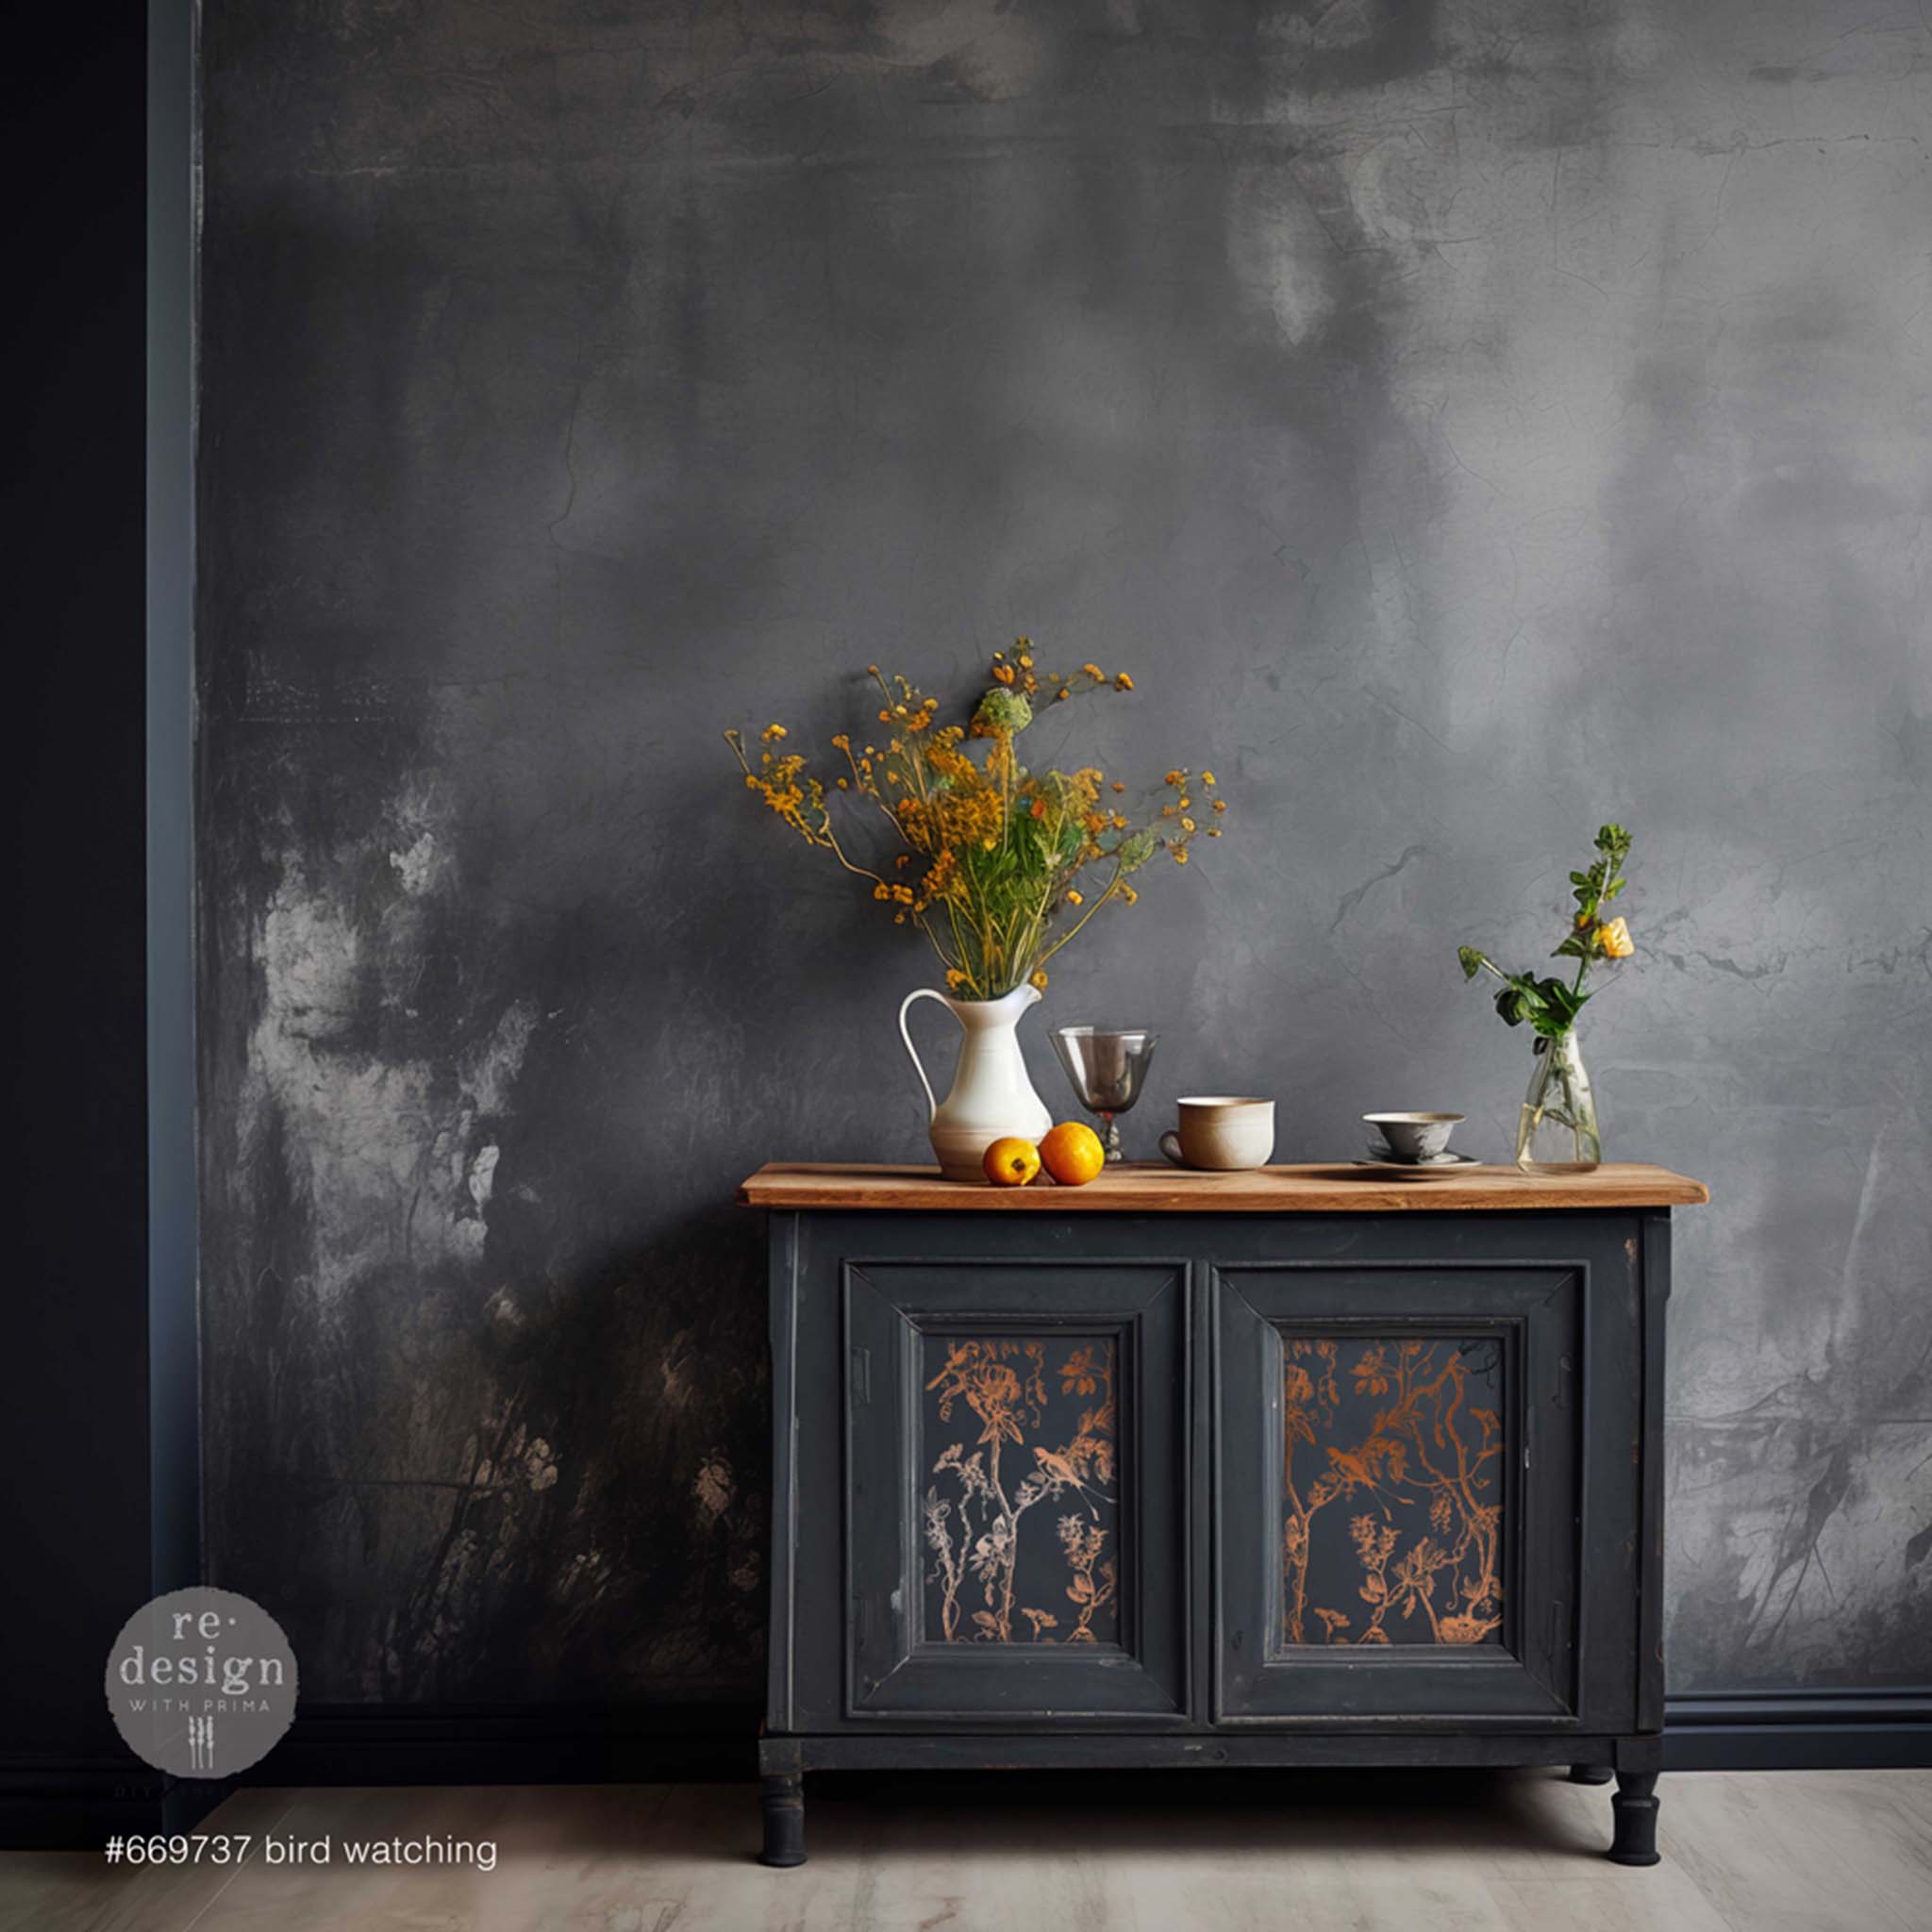 A vintage bar cabinet is painted black with a natural wood top and features ReDesign with Prima's copper foil rub-on transfer Bird Watching by Kacha.